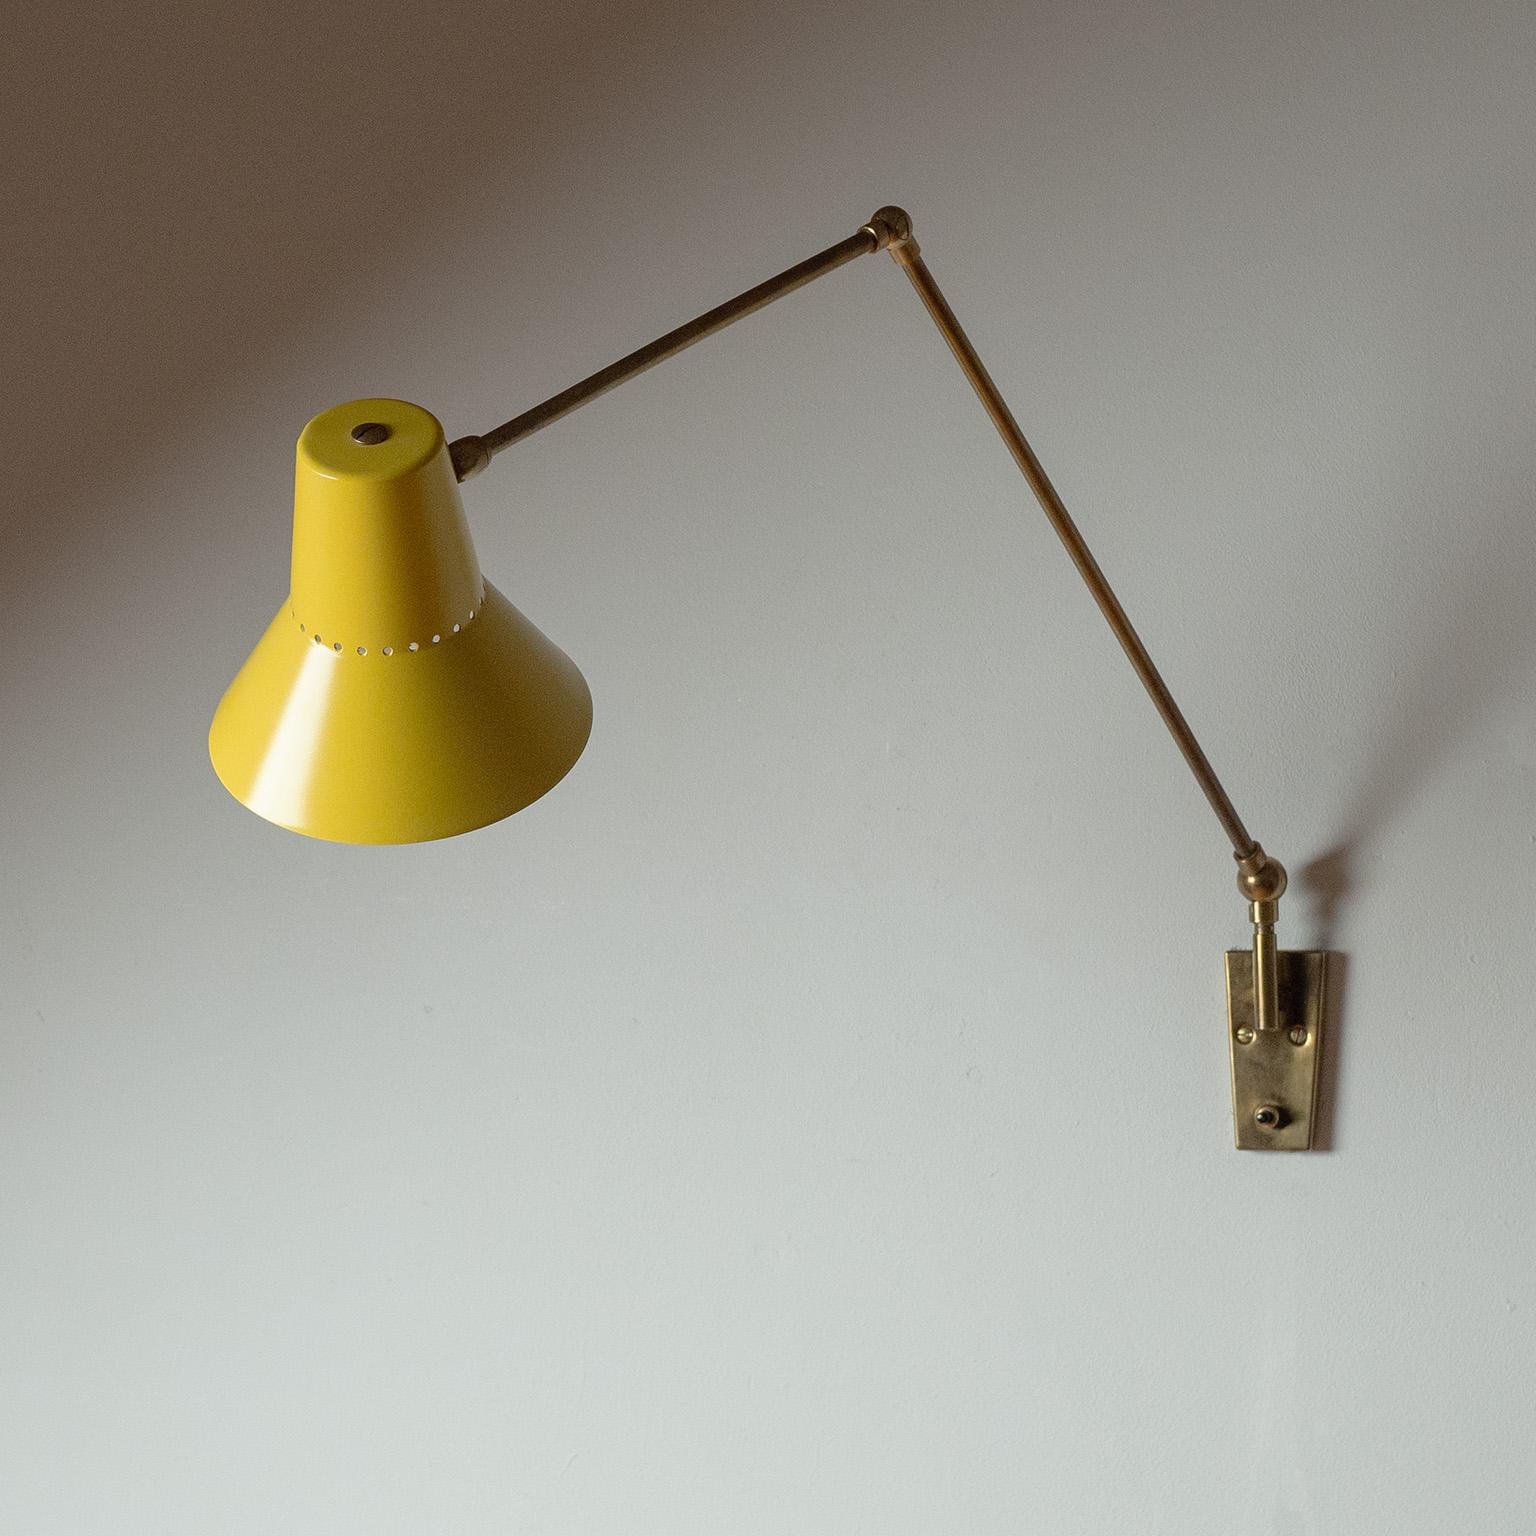 Italian Articulating Wall Light, 1950s For Sale 3